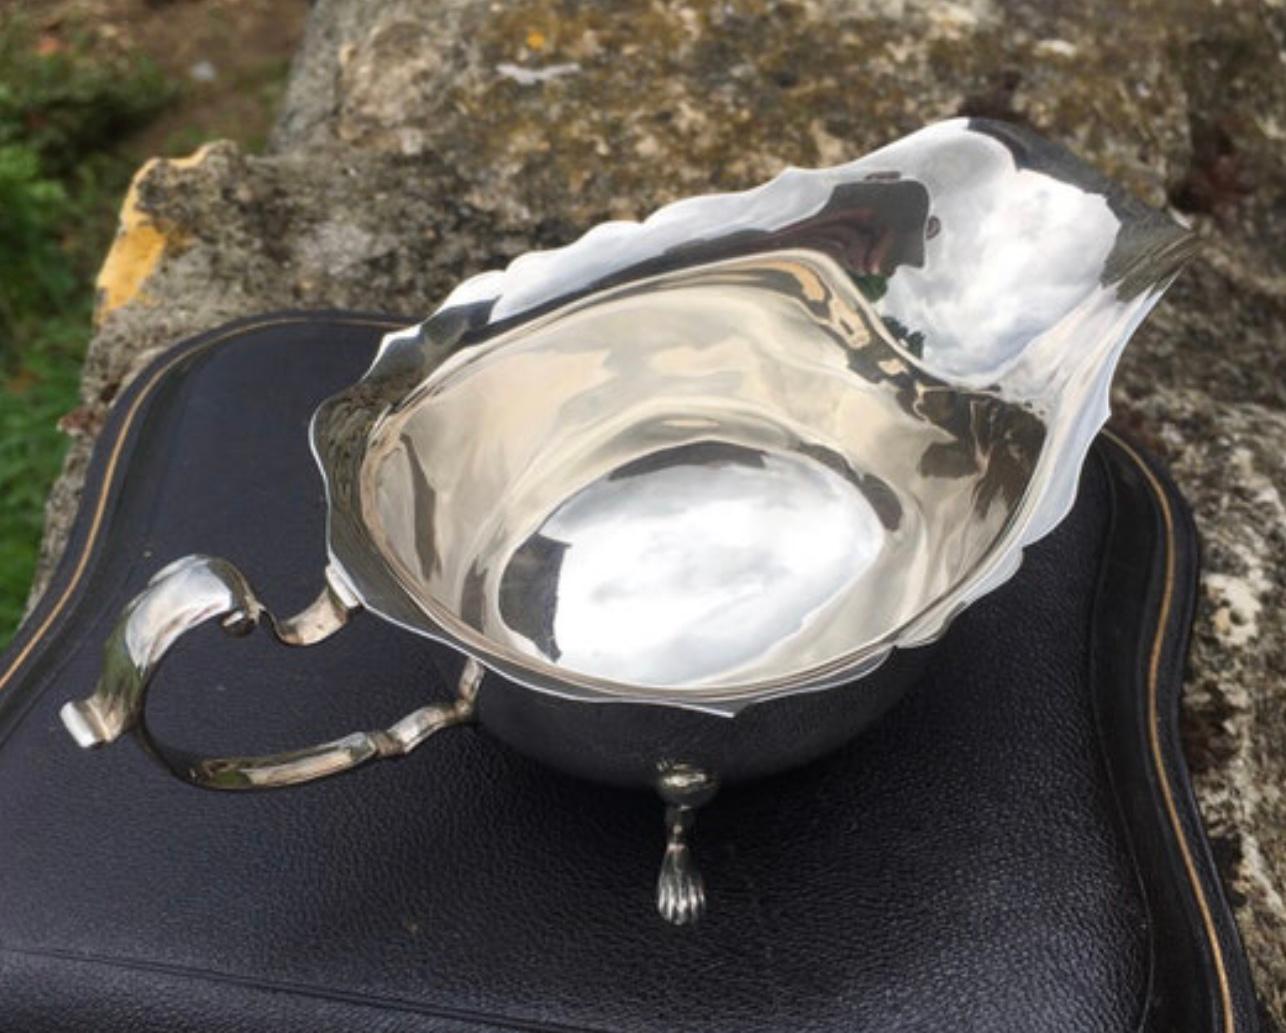 An Antique Edwardian silver sauce / gravy boat.
Chester silver
Fully hallmarked.
Made by Nathan & Hayes in 1915.
In very good condition.
98 grams 
With original box the box is faded and has scuff marks